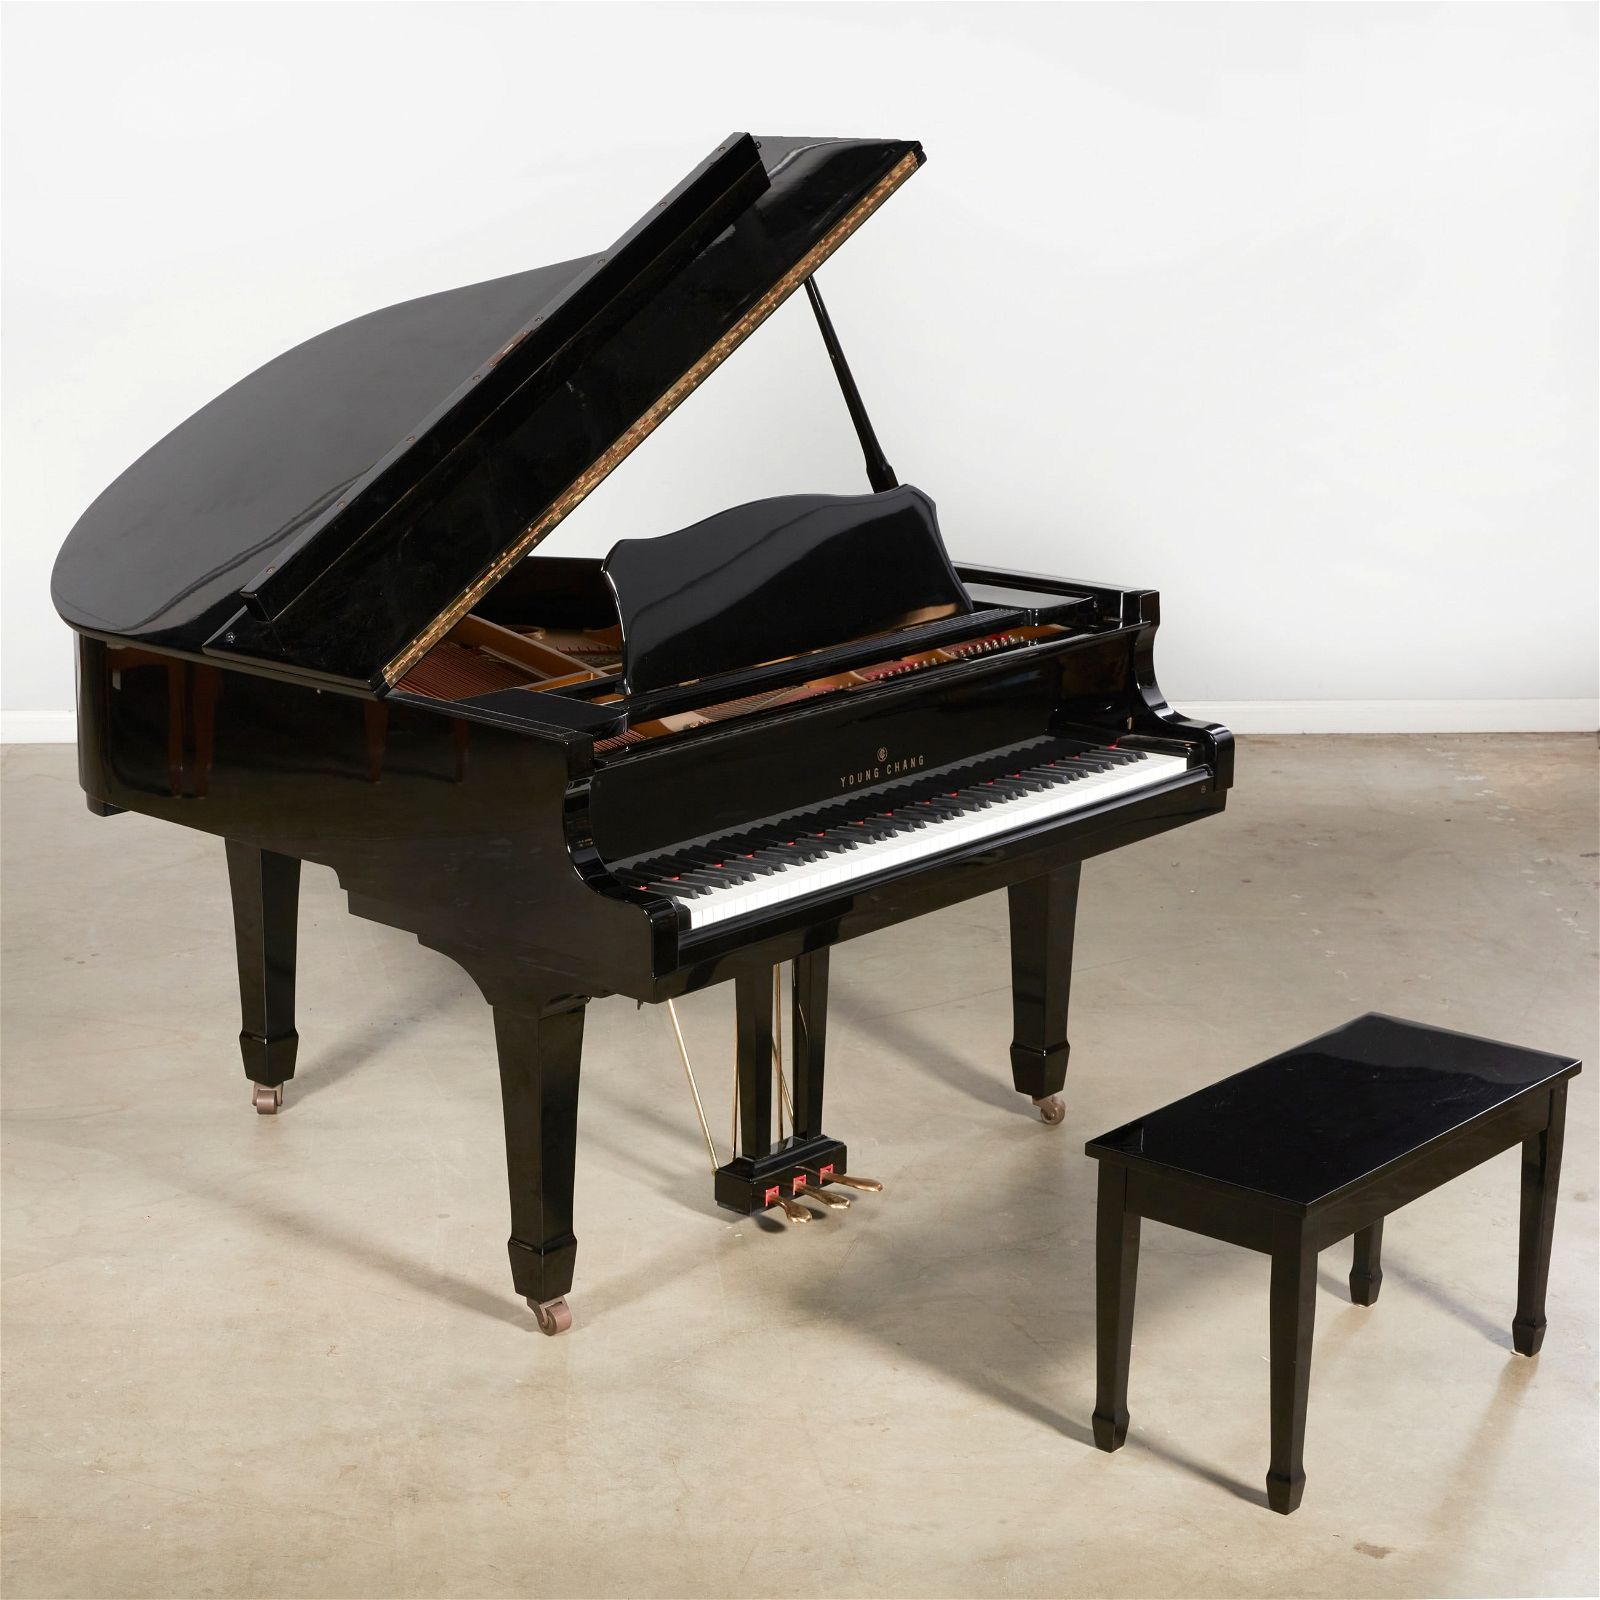 A YOUNG CHANG G 157 BABY GRAND